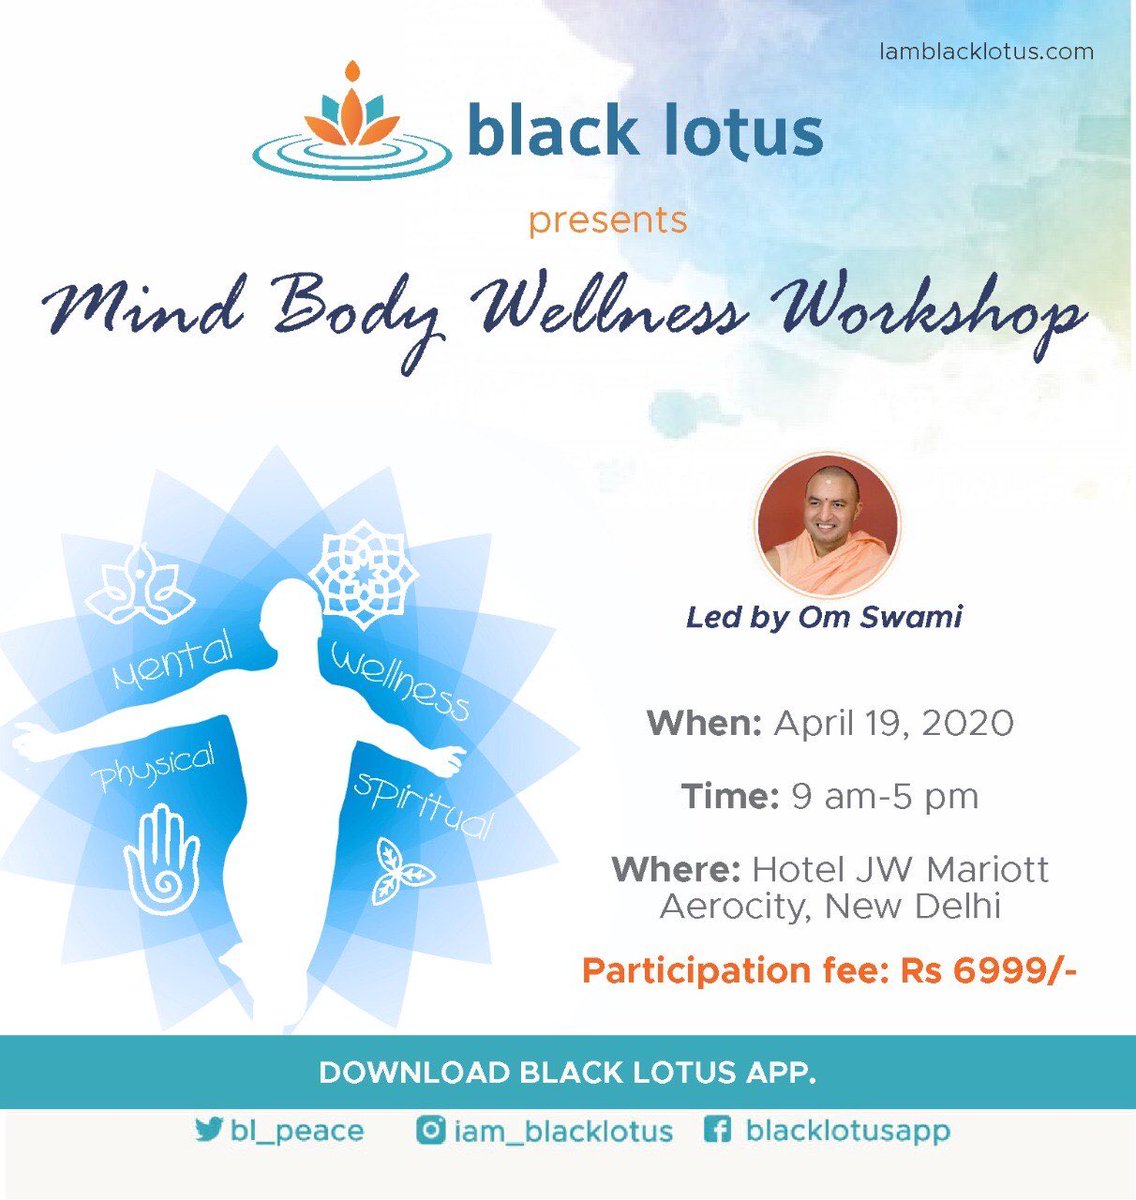 Here is your chance to learn the life-hacks for a fit mind and healthy body at the first-ever Mind-Body Wellness Workshop led by Om Swami. #Wellness #Fitness #SaturdayMotivation Book your spot now! iamblacklotus.com/event/black-lo…